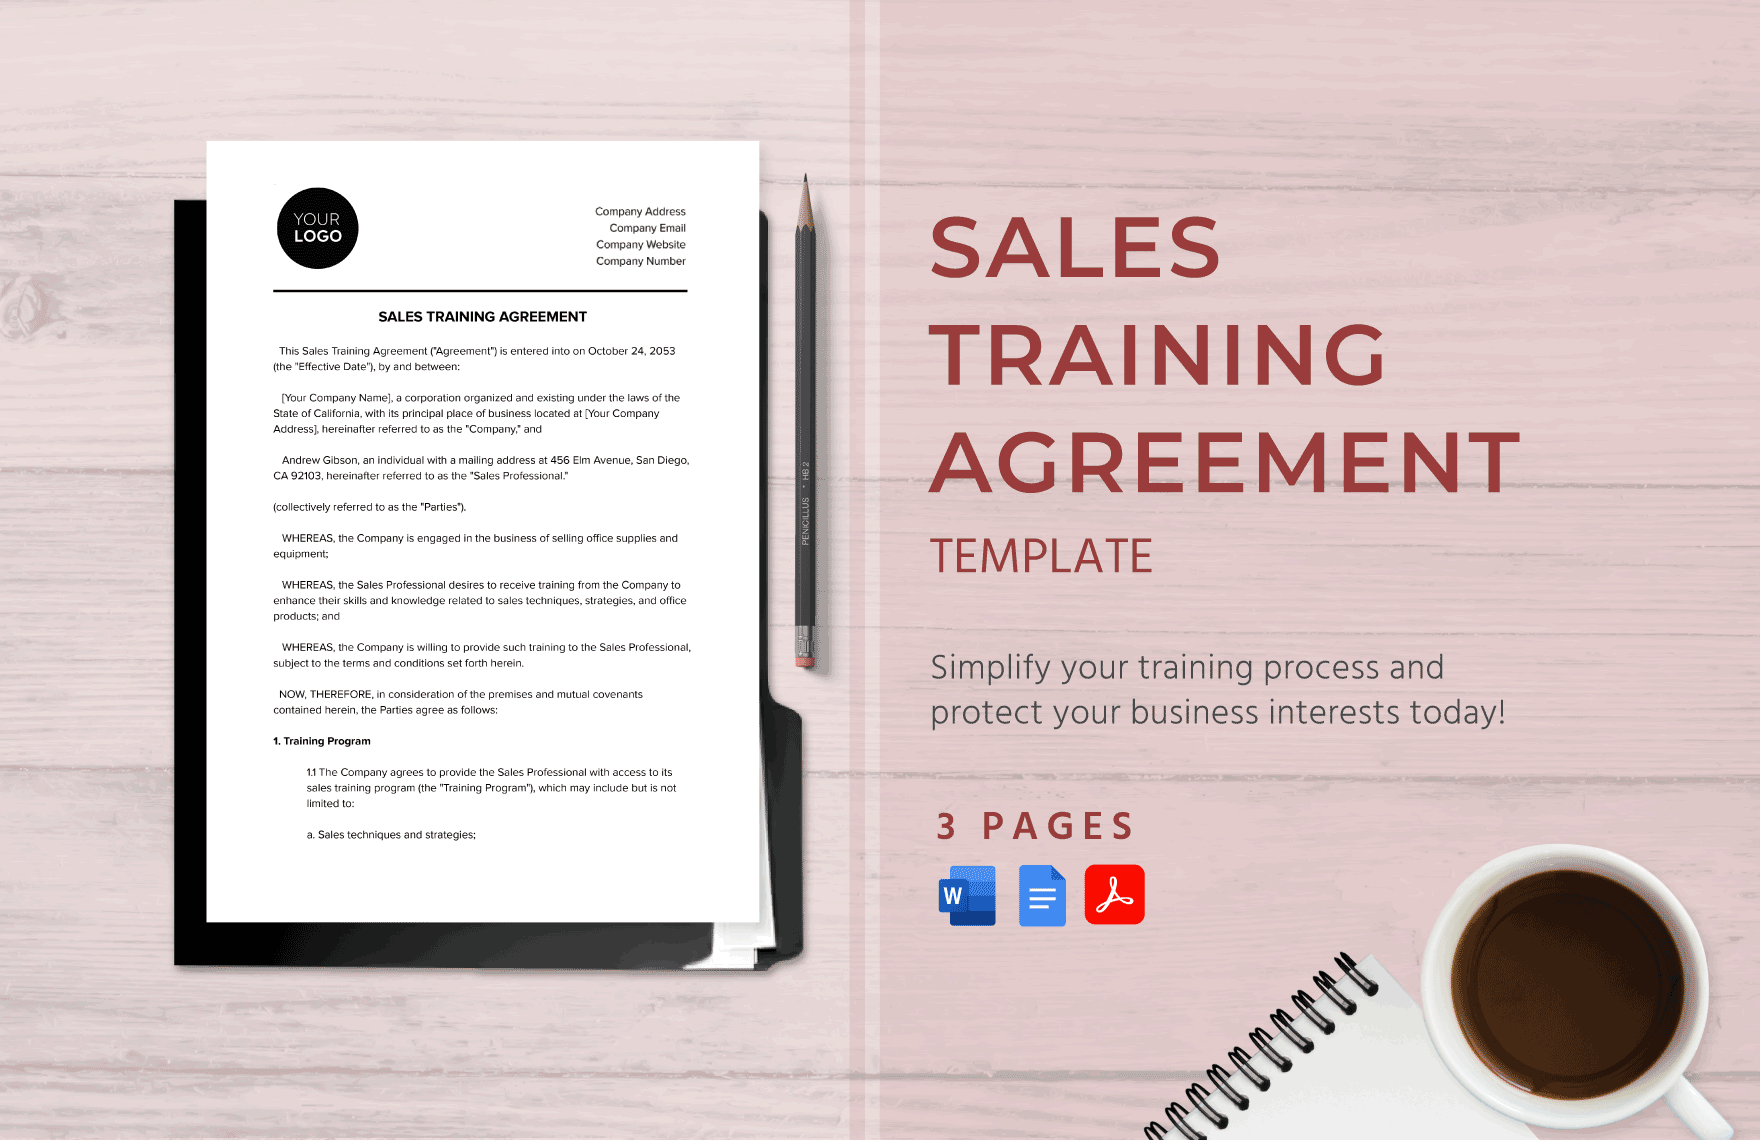 Sales Training Agreement Template in Word, Google Docs, PDF